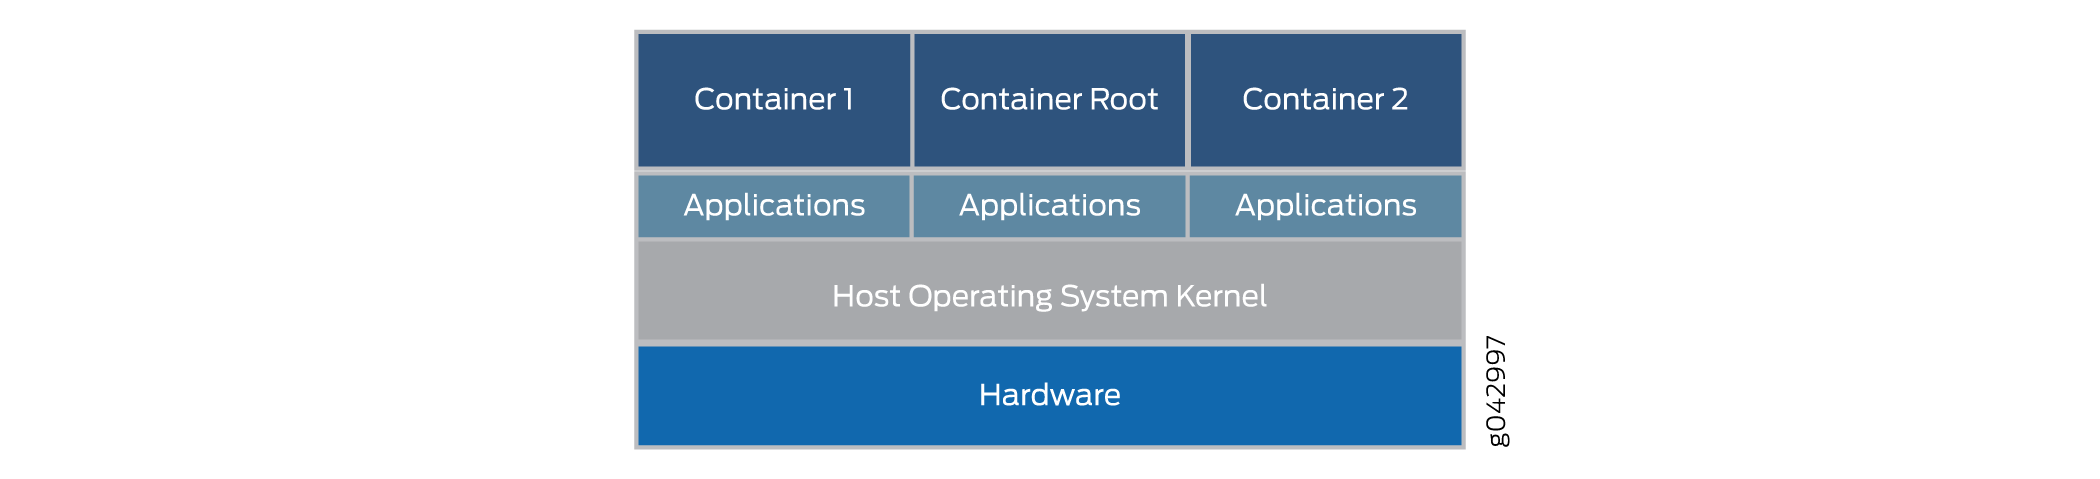 Containers–Overall Architecture